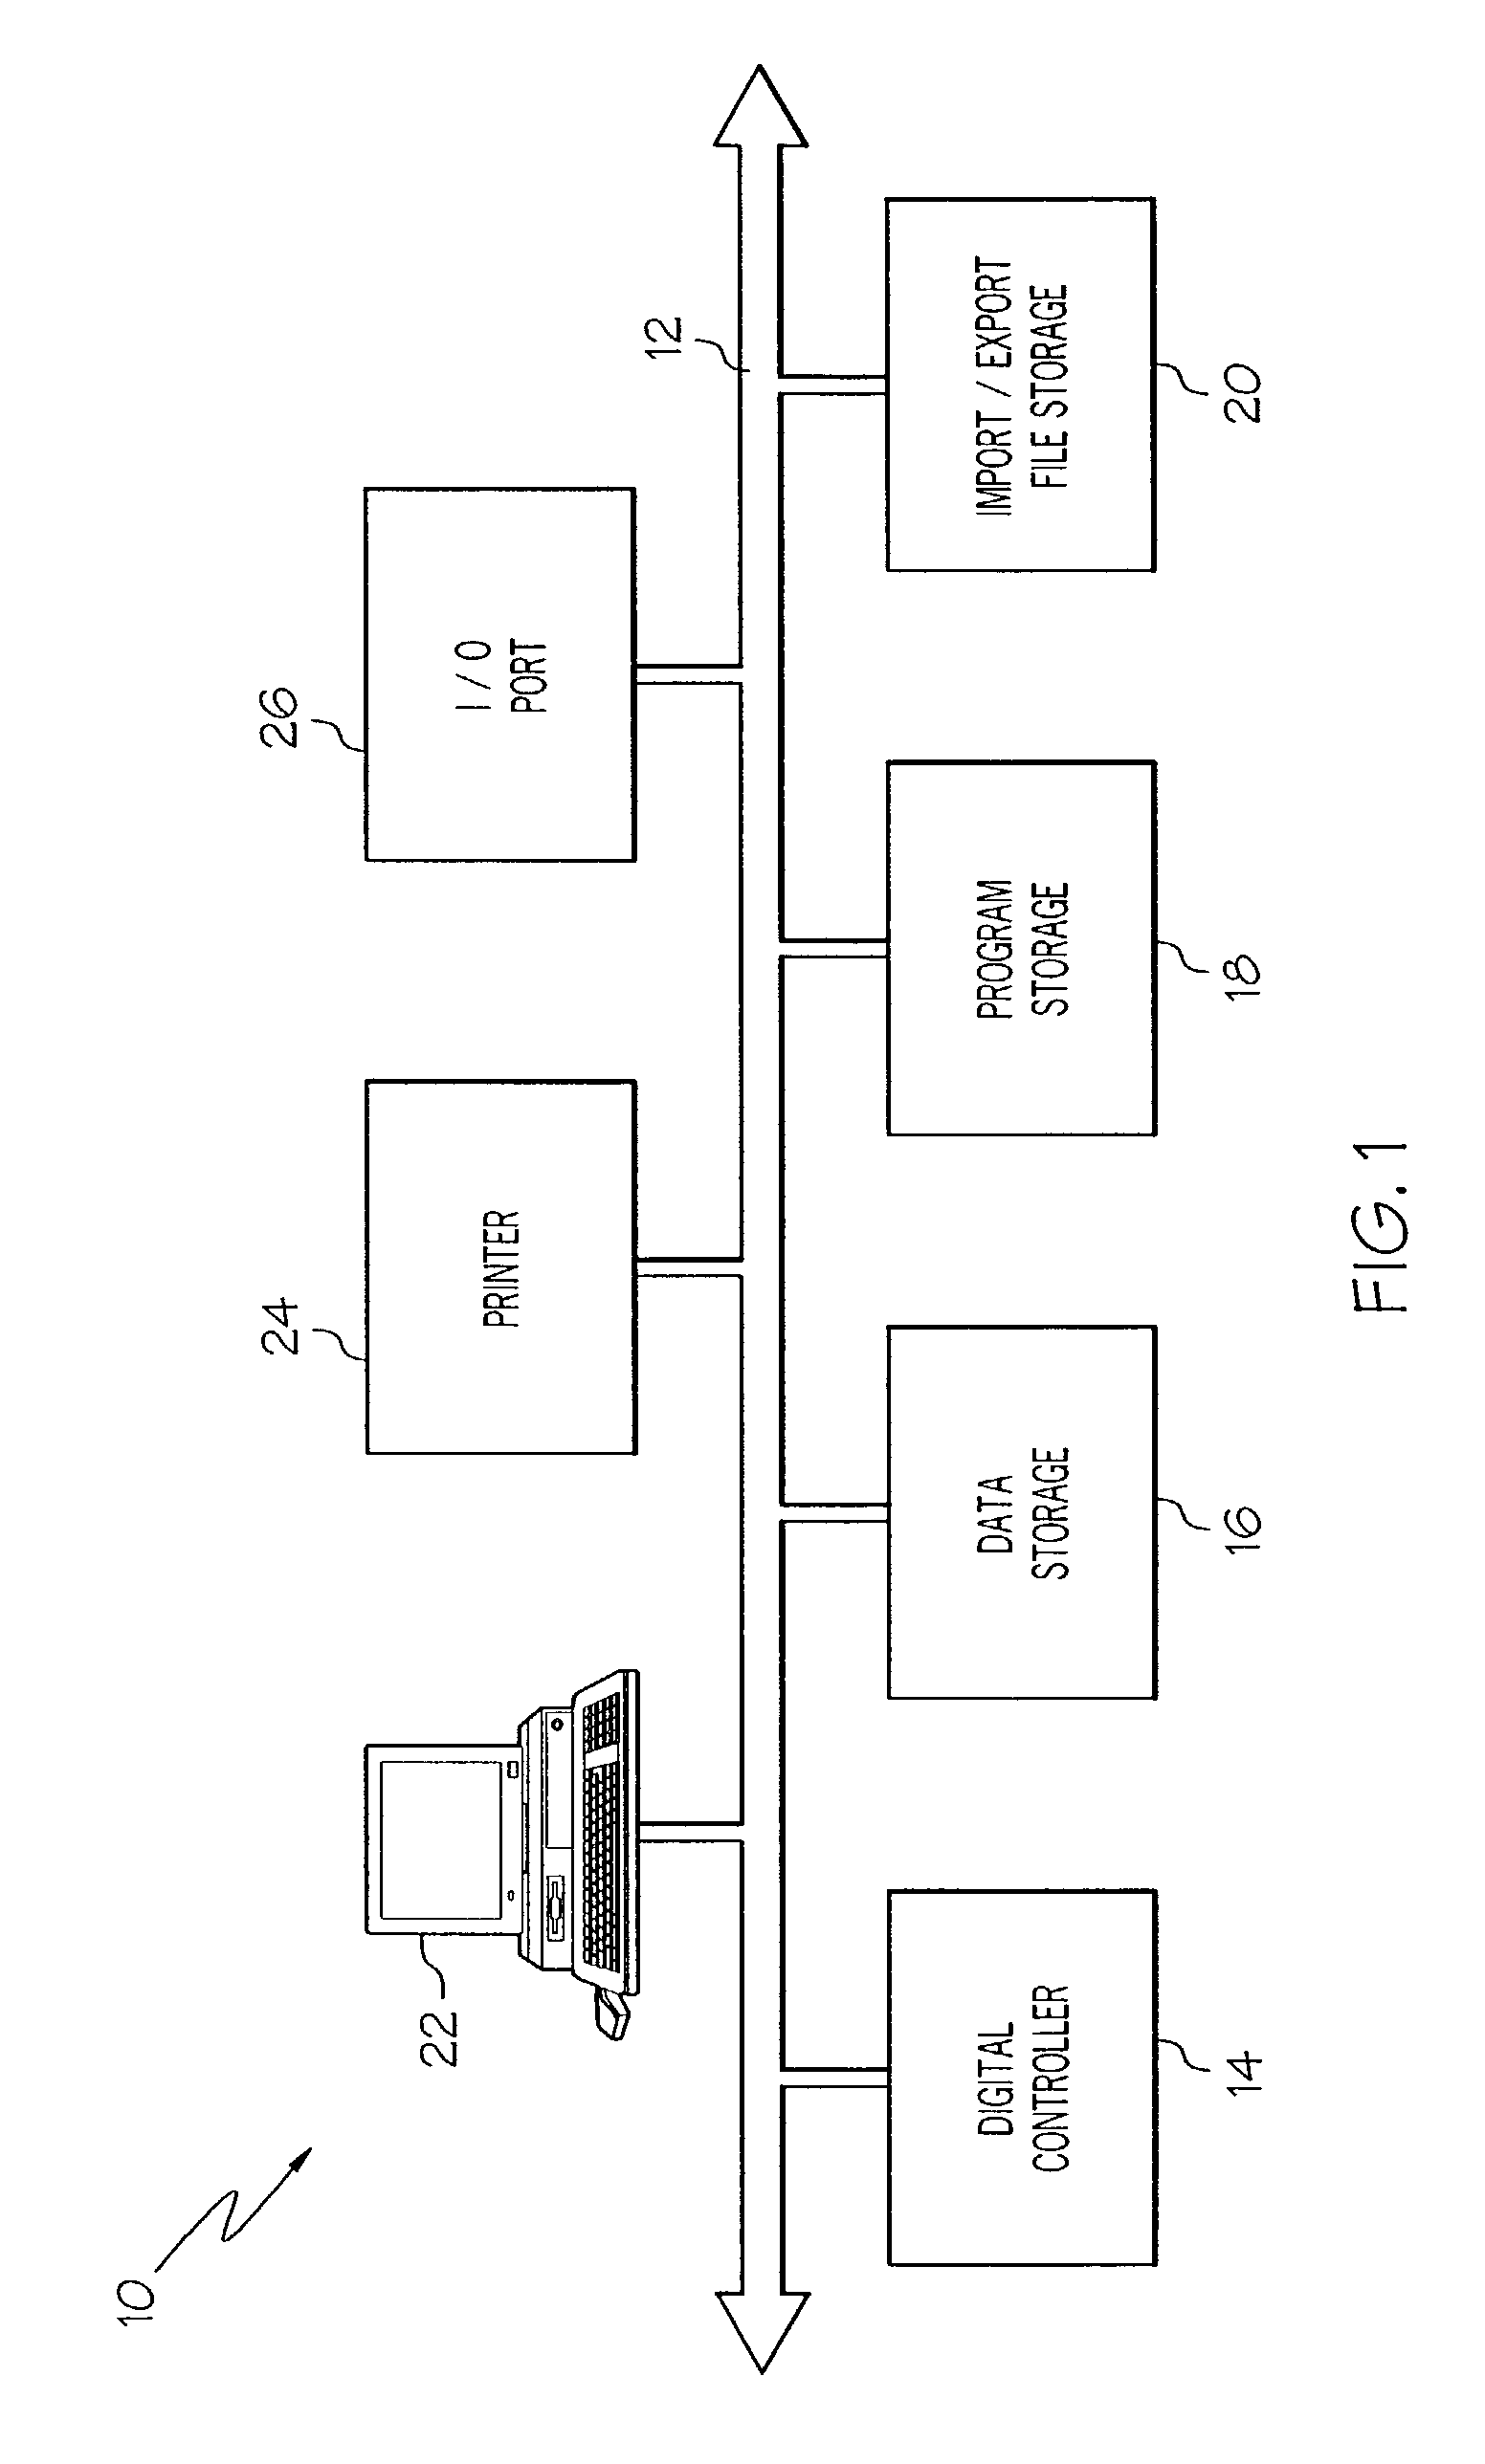 Document audit analysis system and method